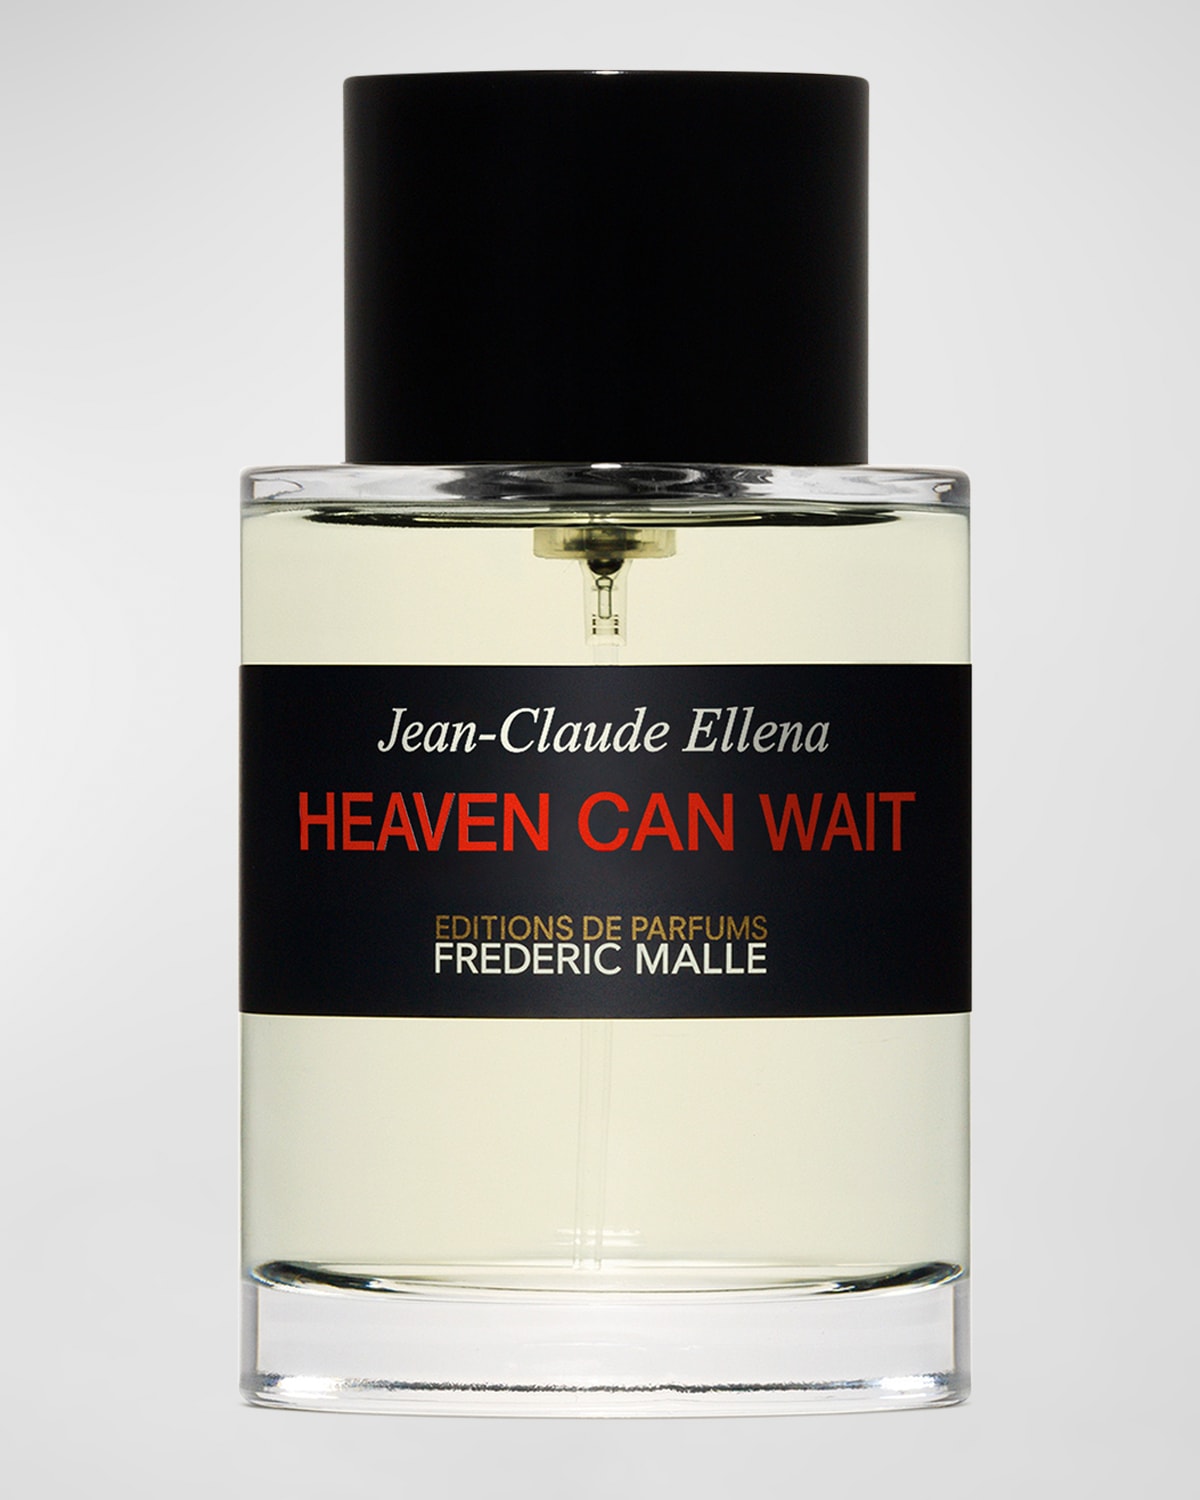 Shop Editions De Parfums Frederic Malle Heaven Can Wait Perfume Holiday Edition, 3.3 Oz.